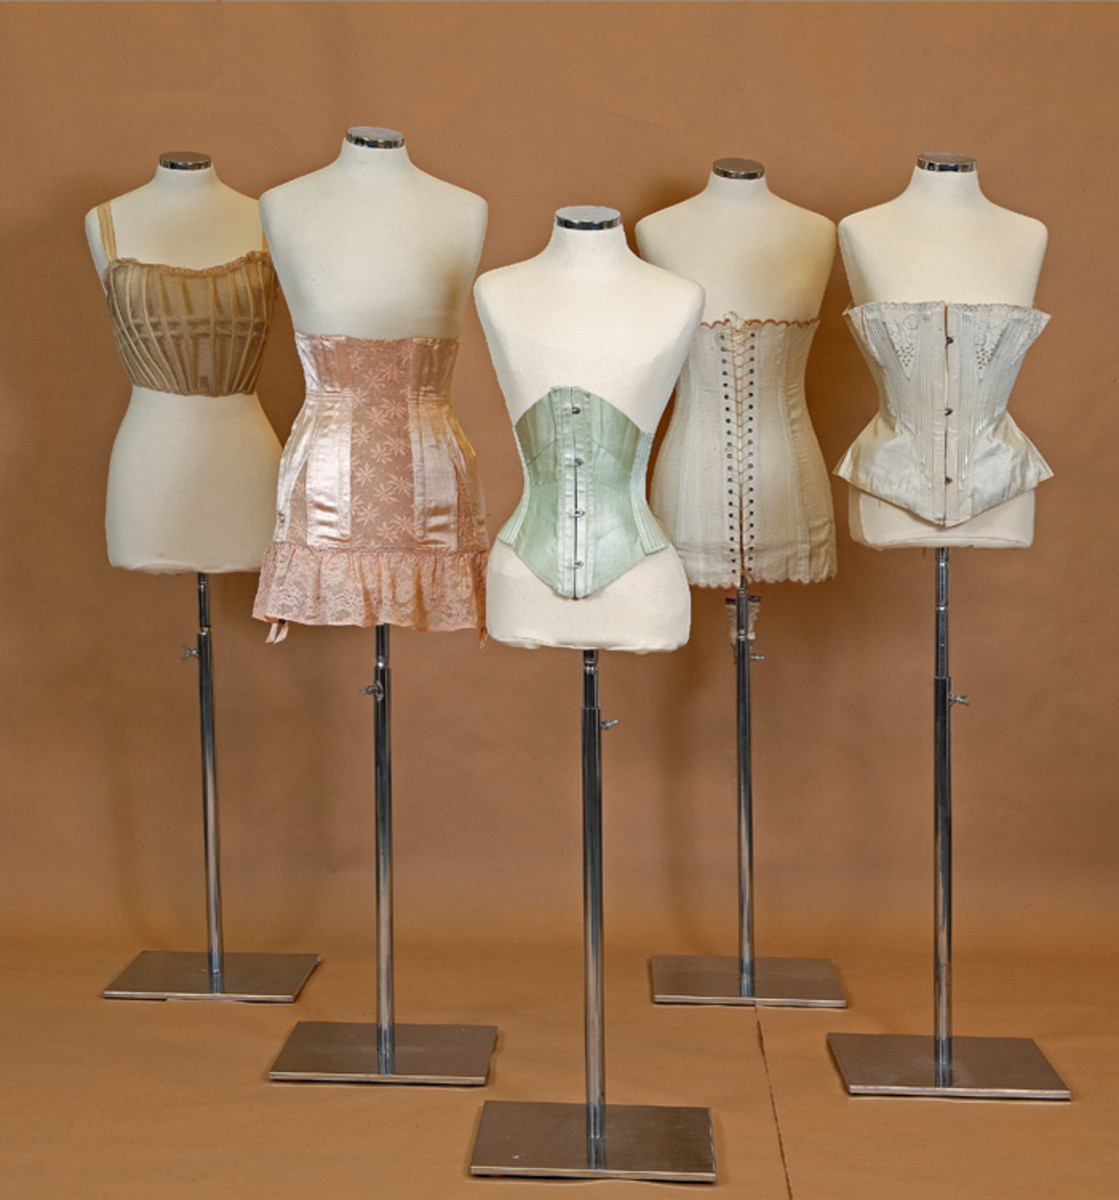 The late 19th and 20th centuries saw the corset come in many different shapes and sizes. 